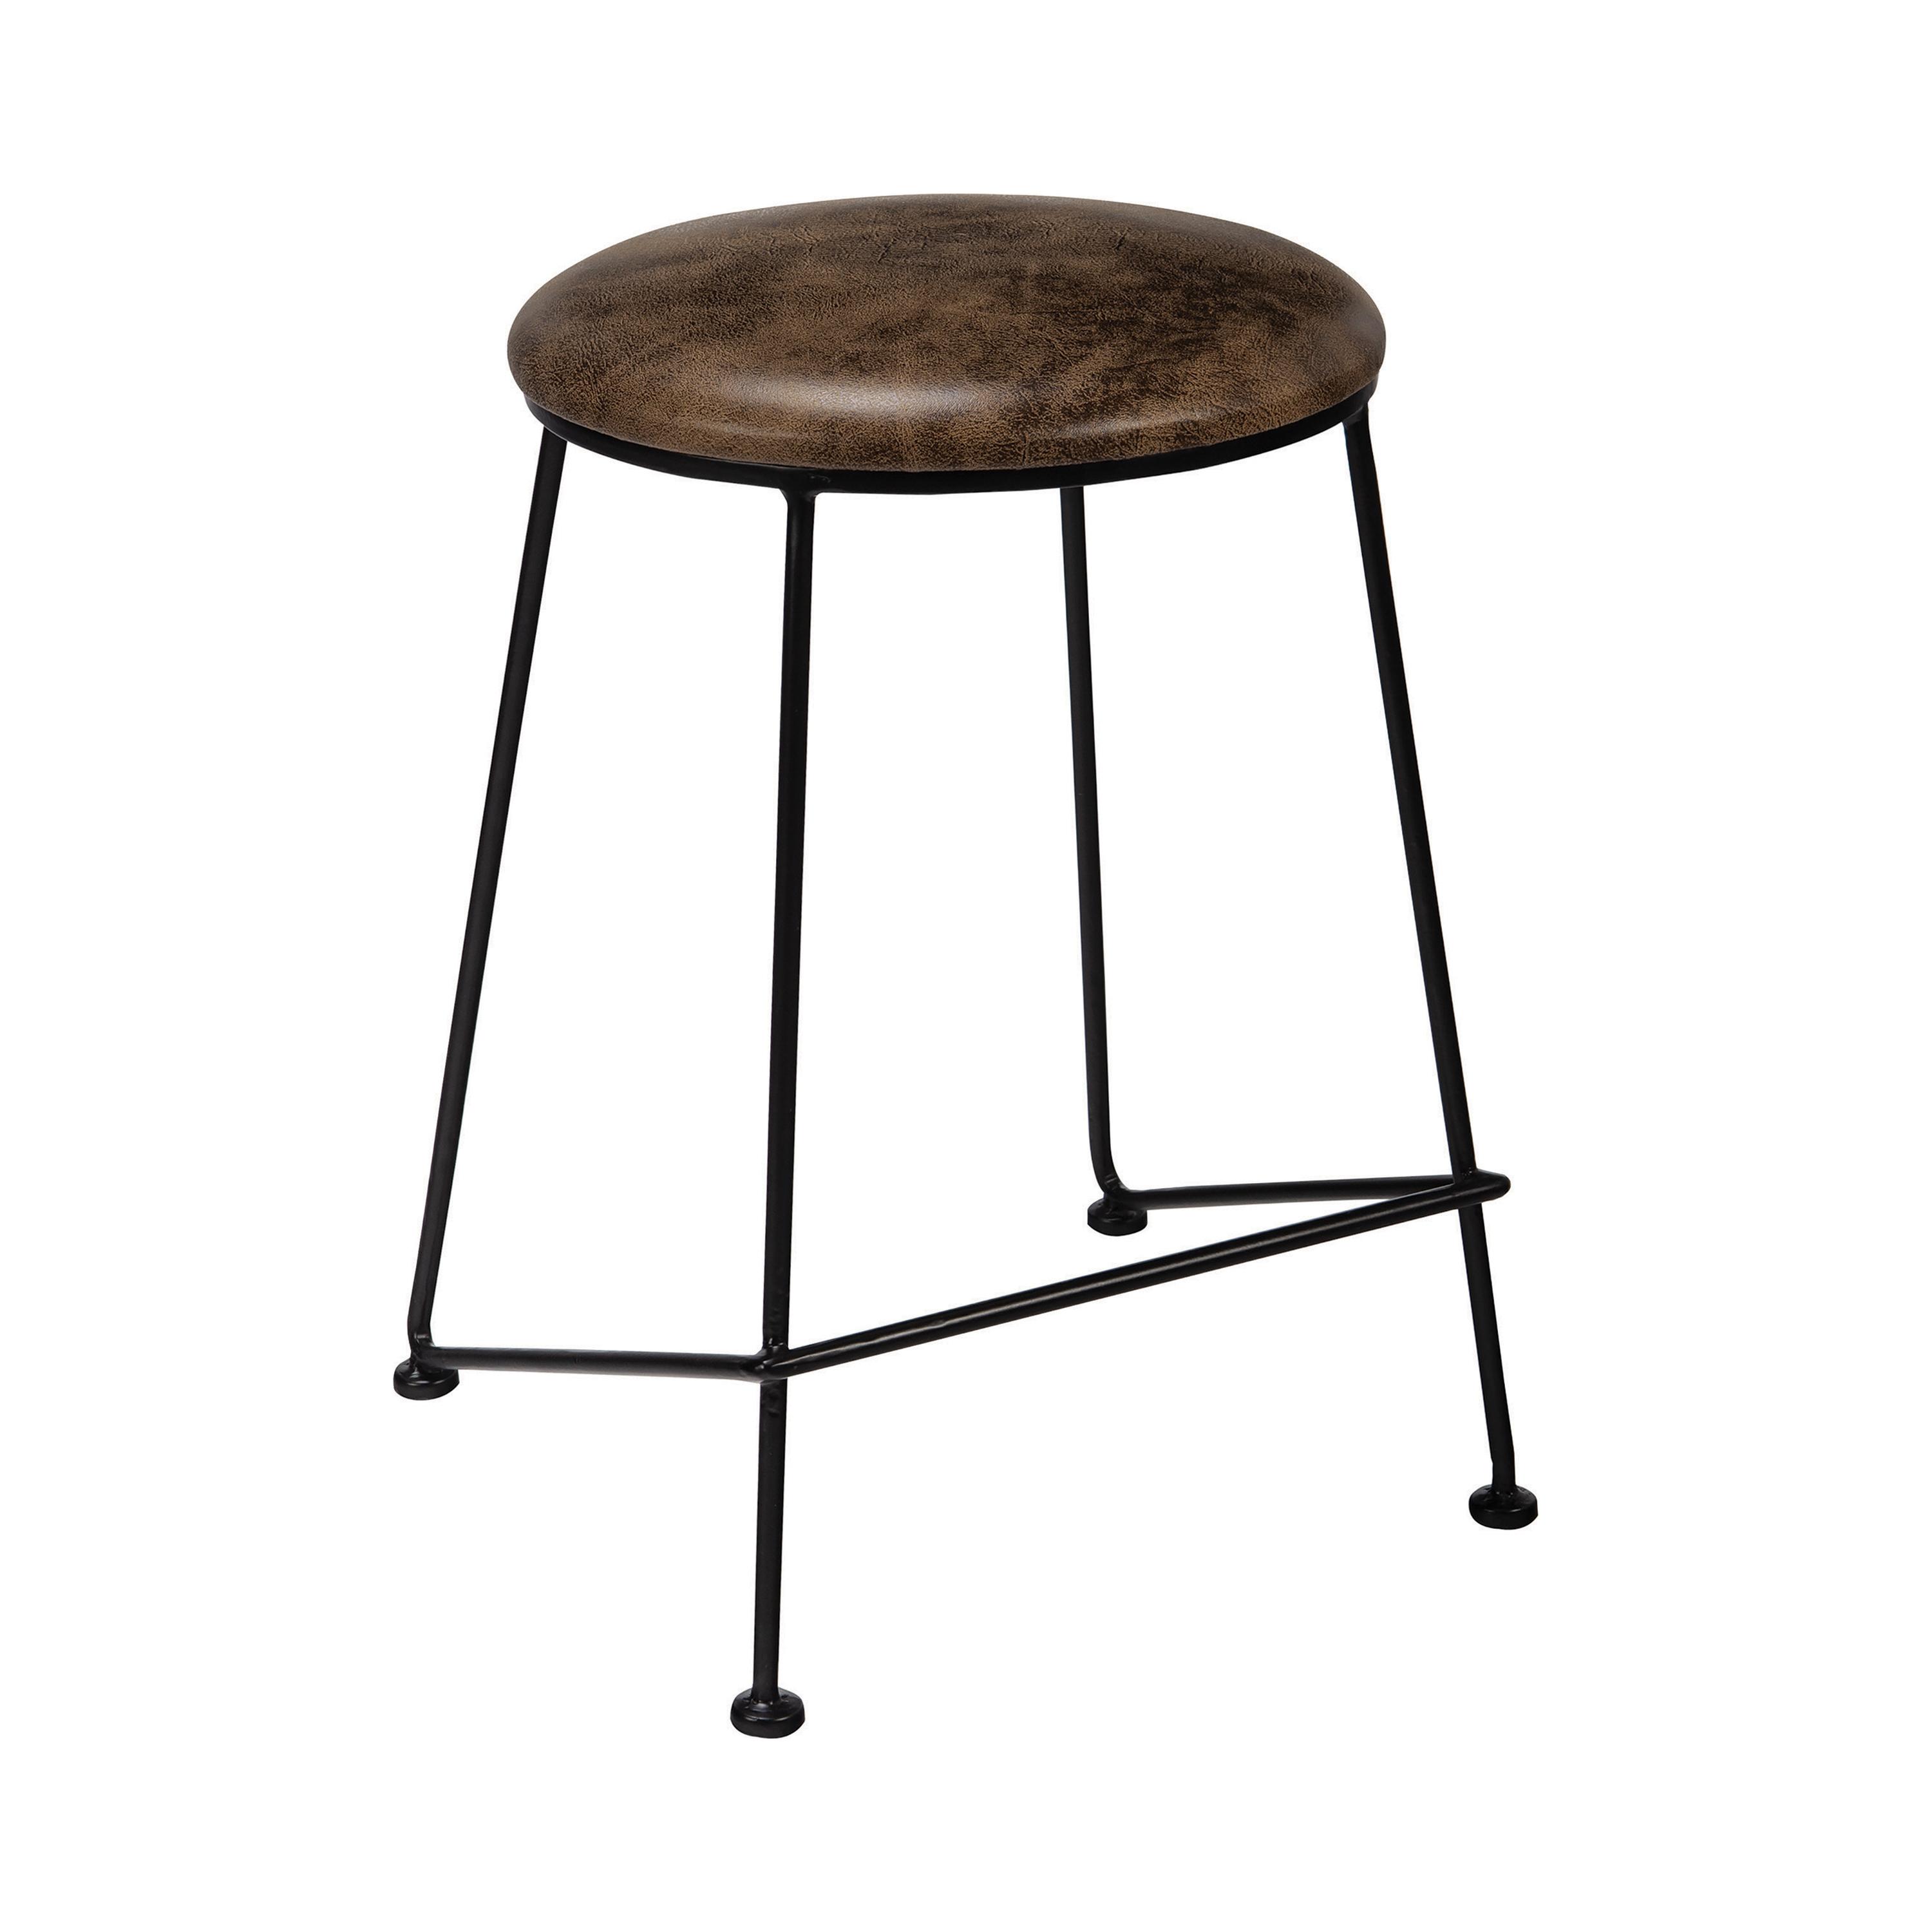 Modern Counter Height Stool 192538 192538 in Saddle 